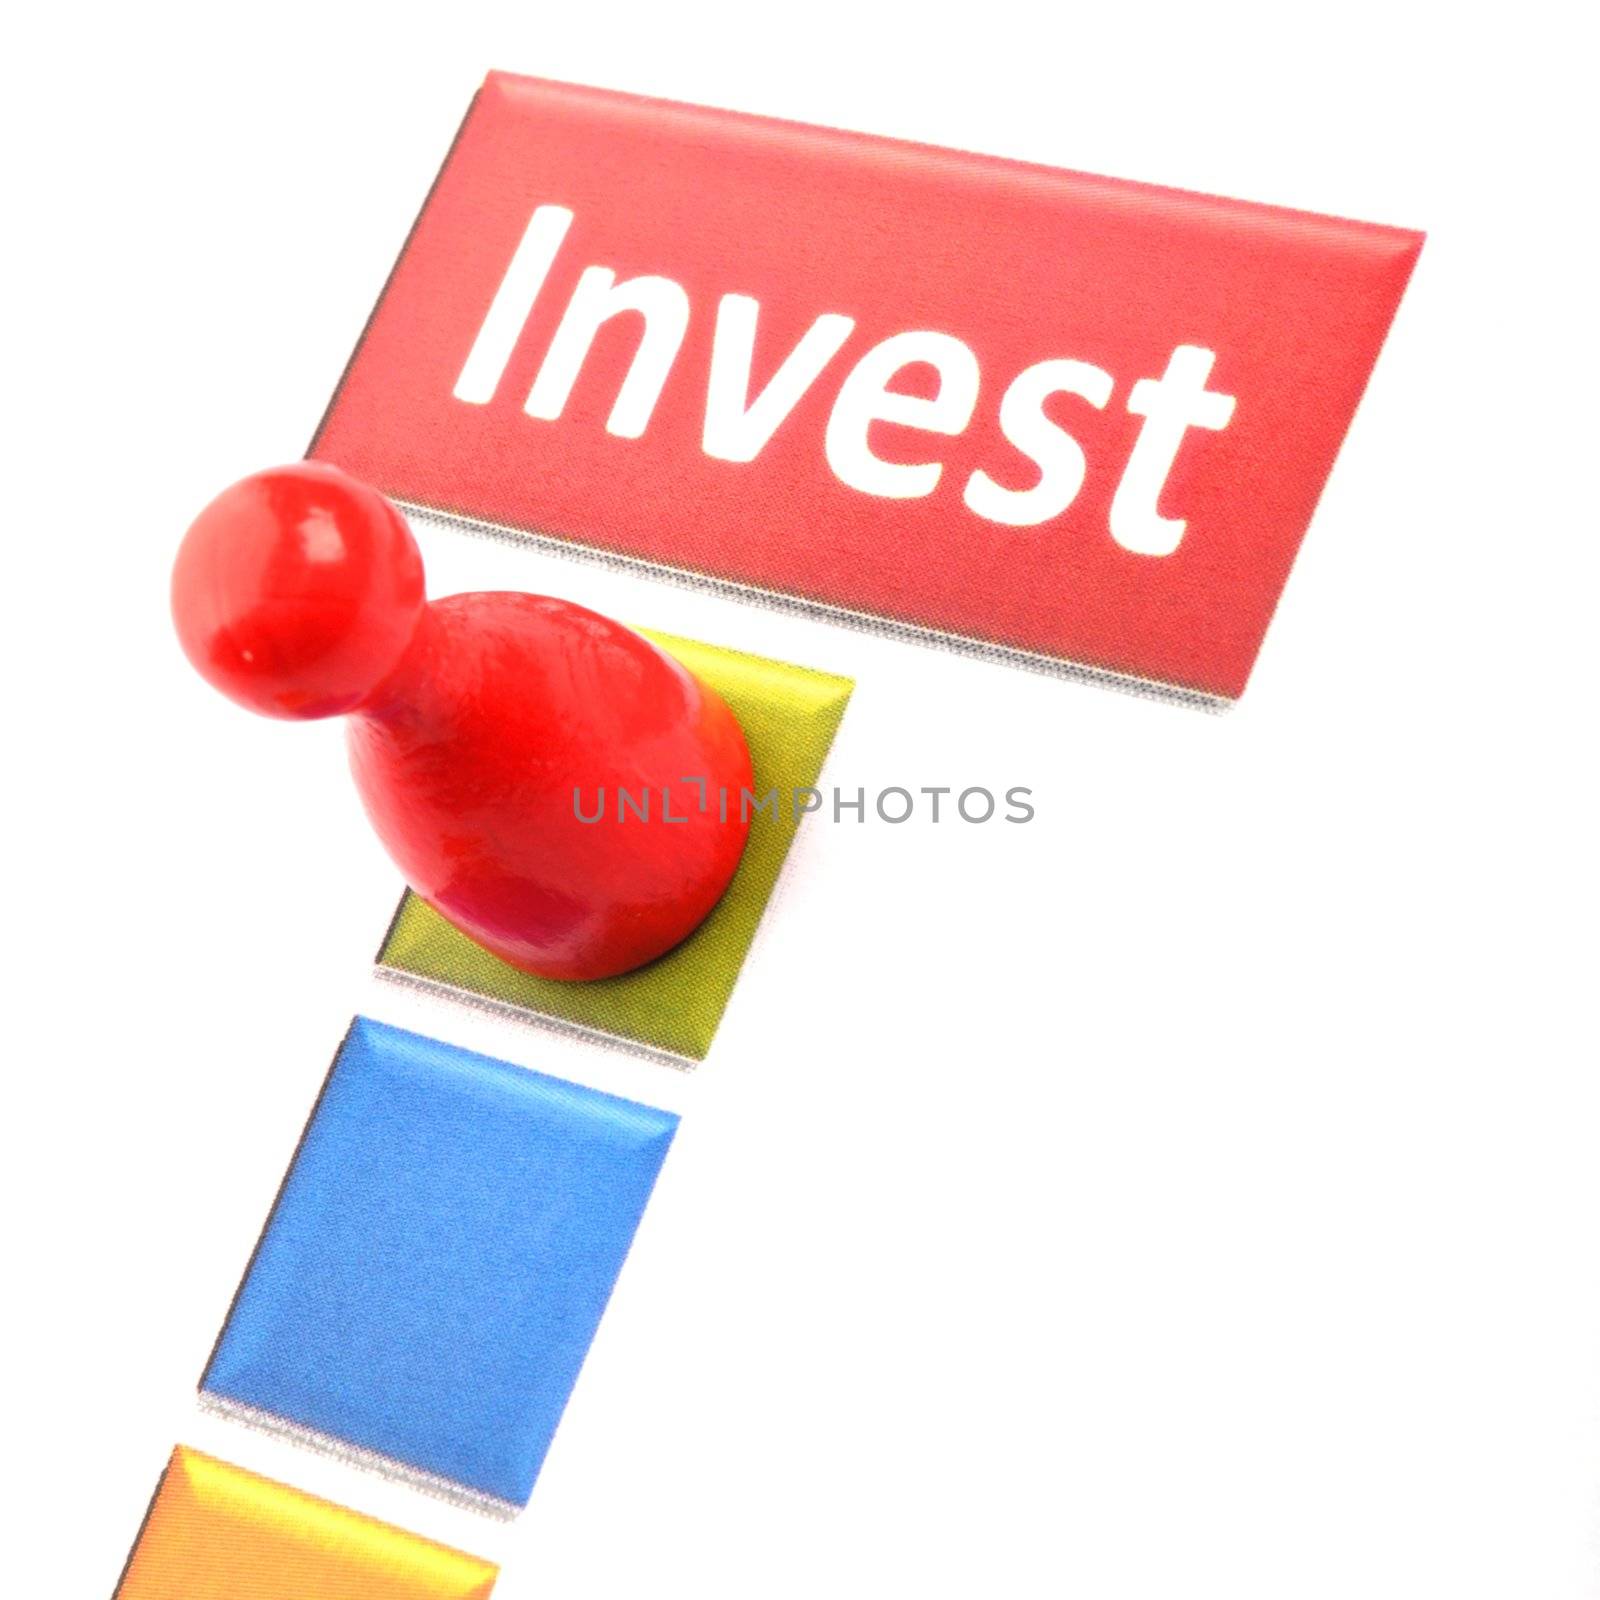 invest investment finance financial or business concept with pawn in white